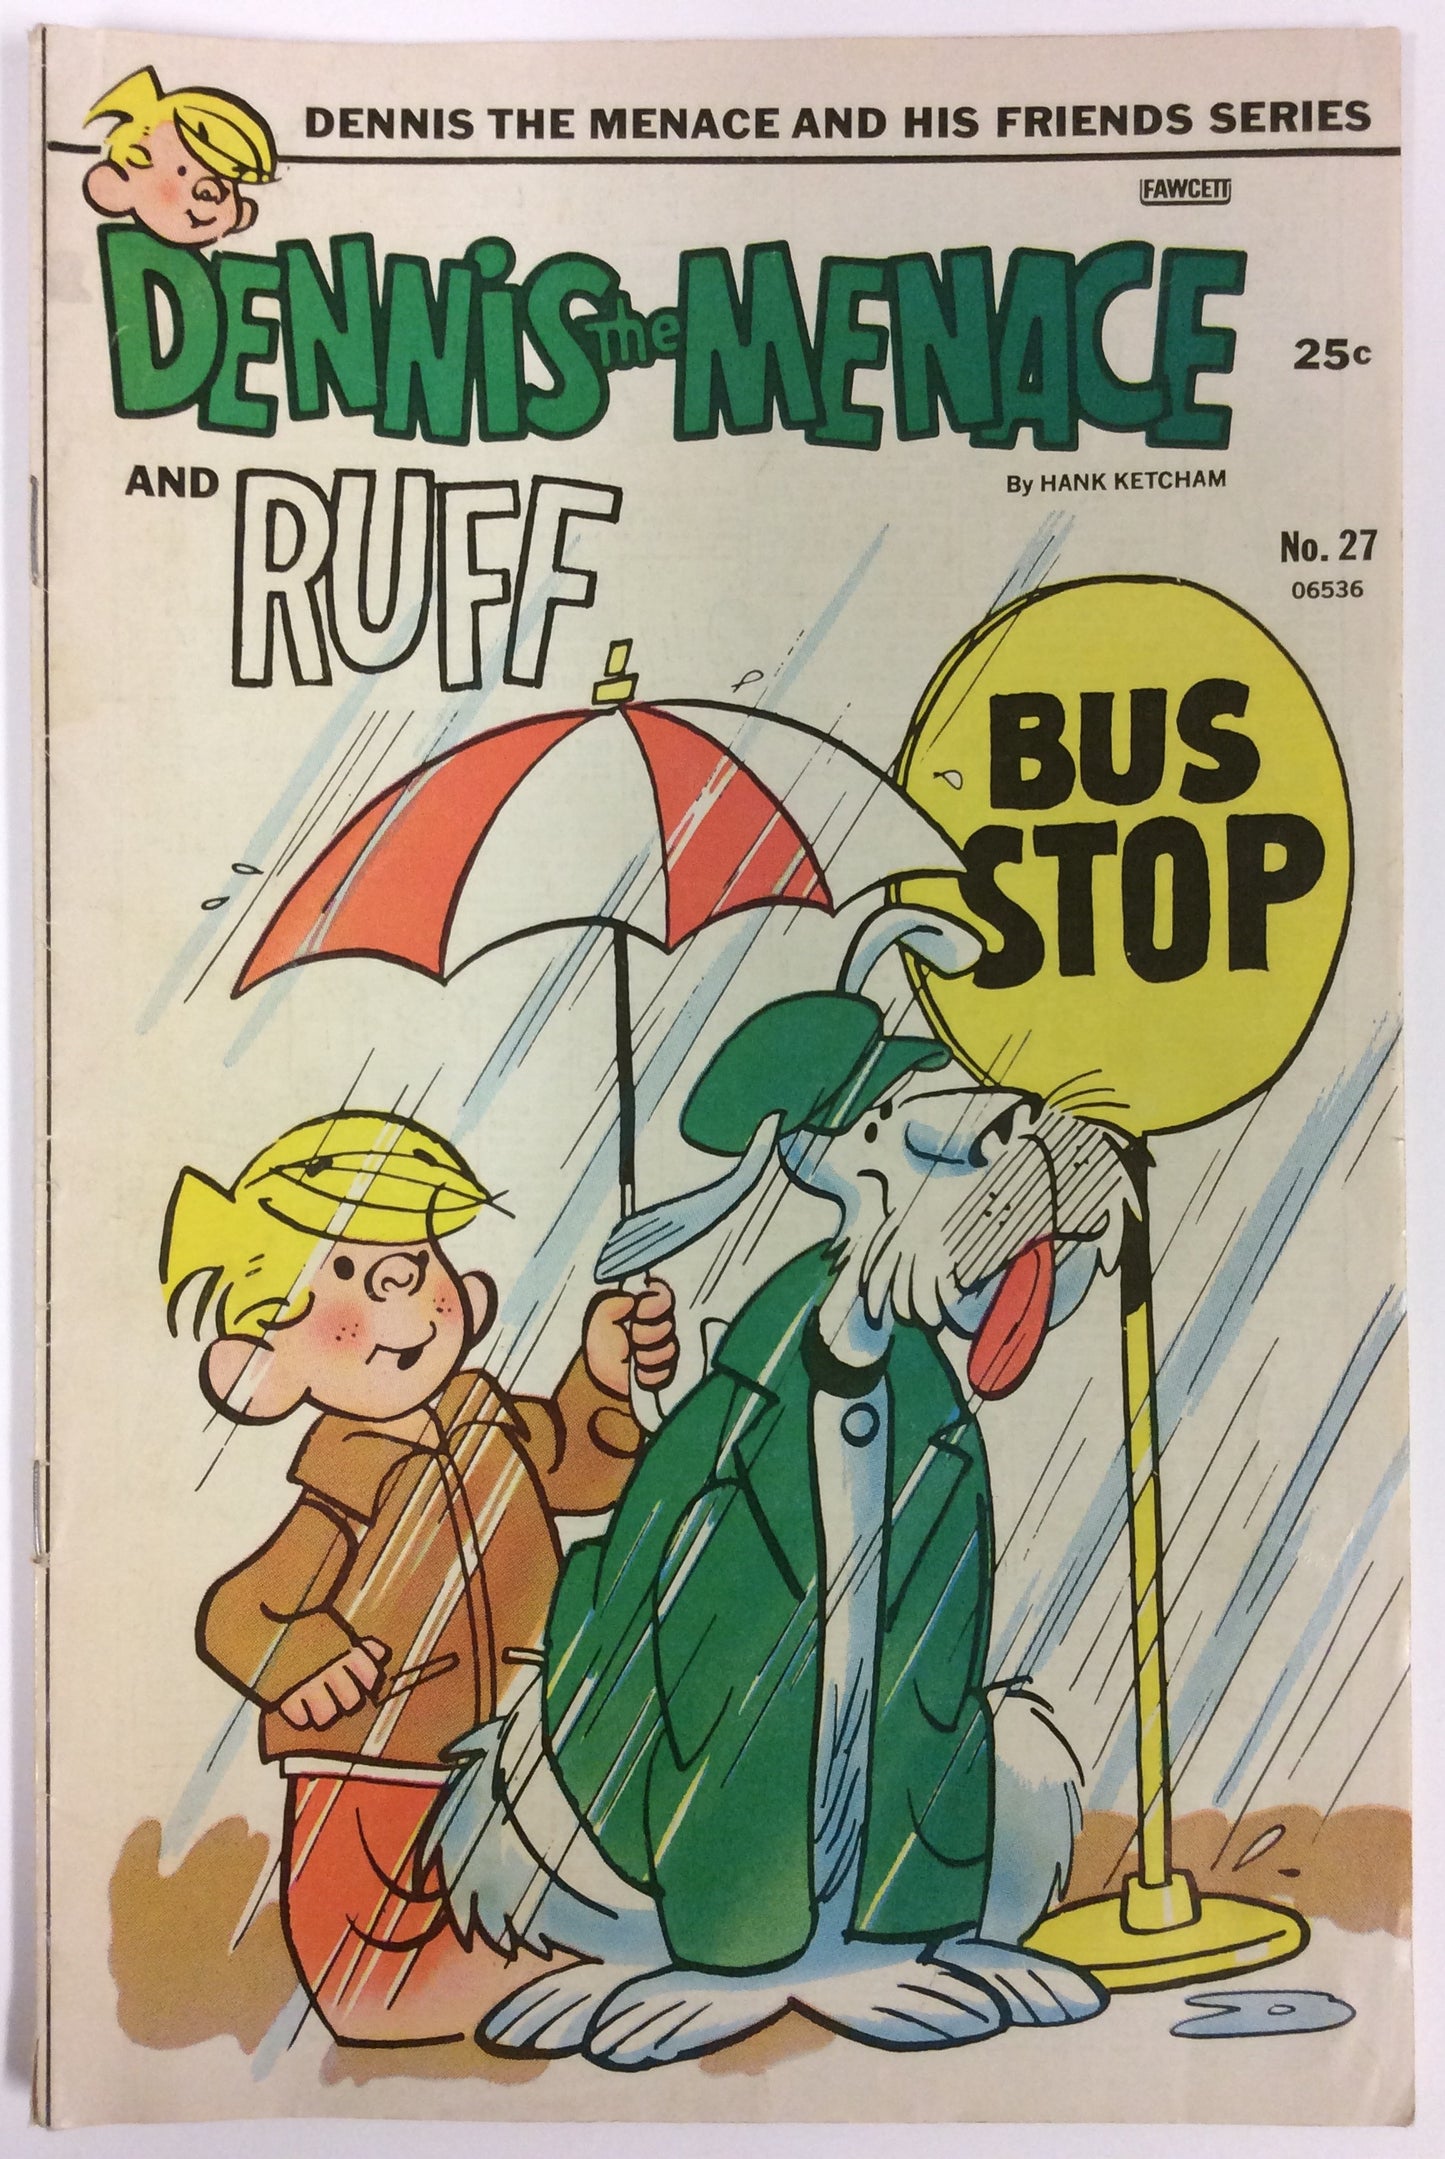 Dennis the Menace and Ruff #27